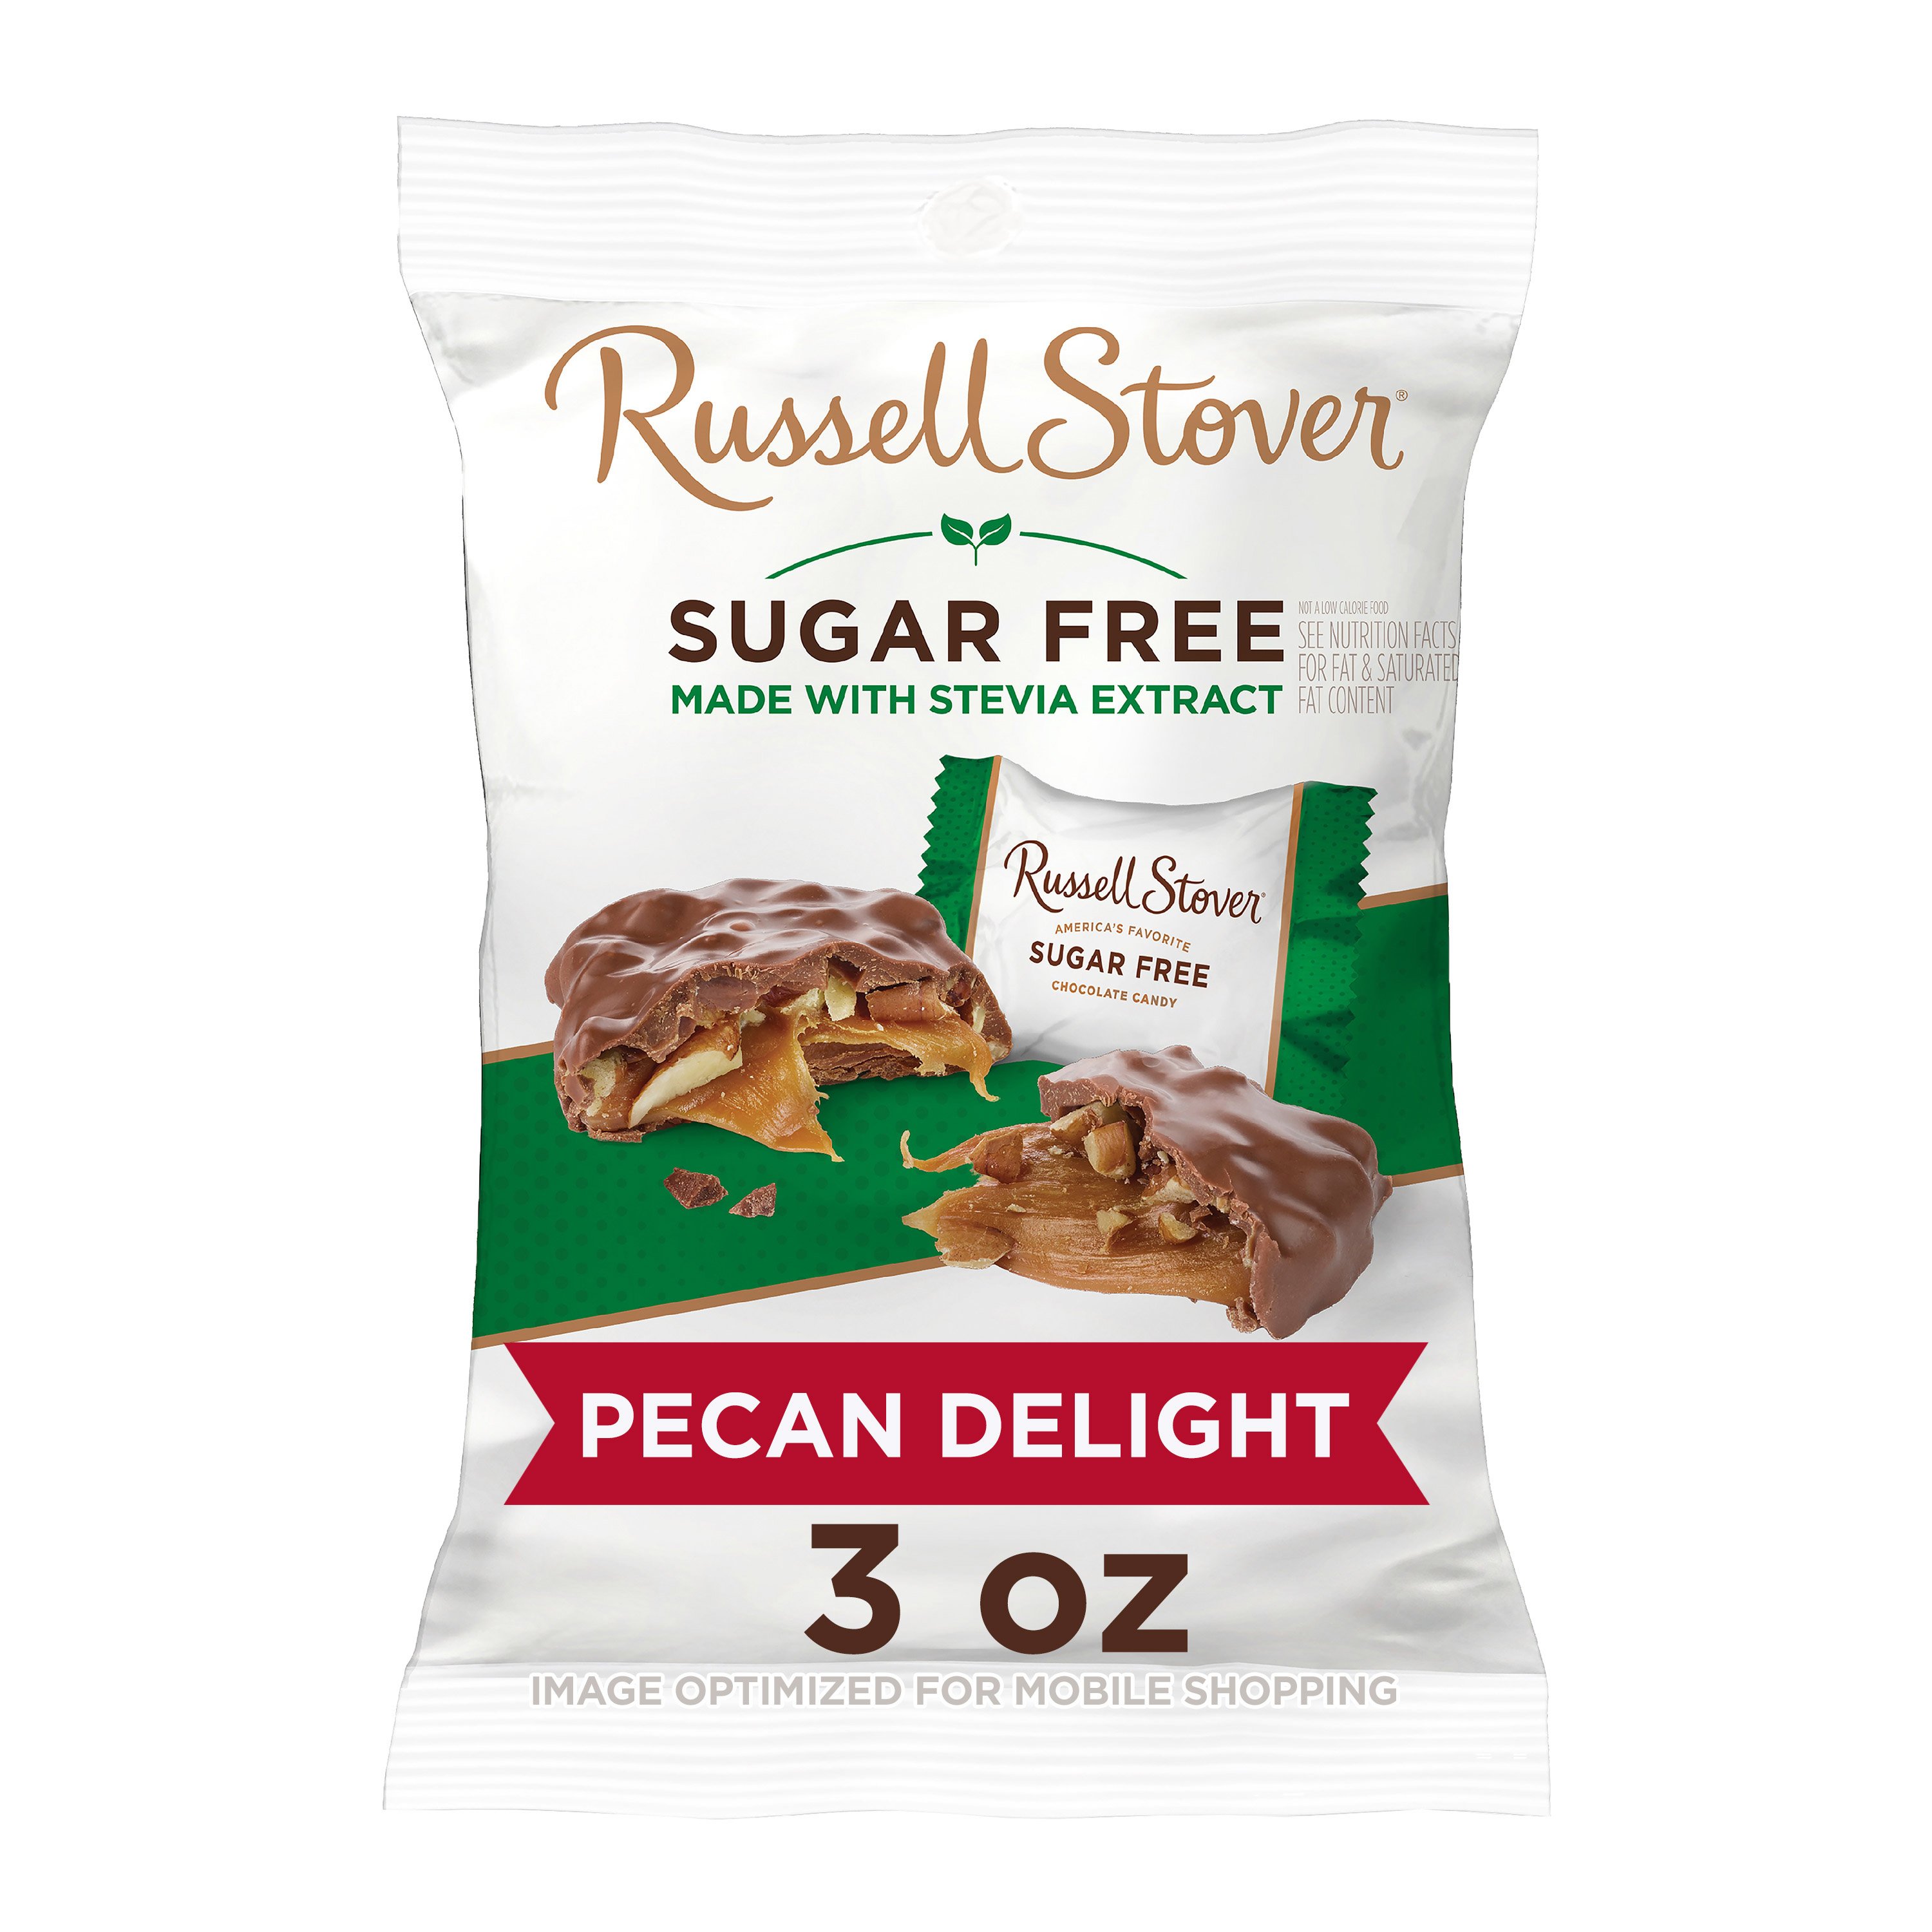 Russell Stover Sugar Free Pecan Delights - Shop Candy at H-E-B